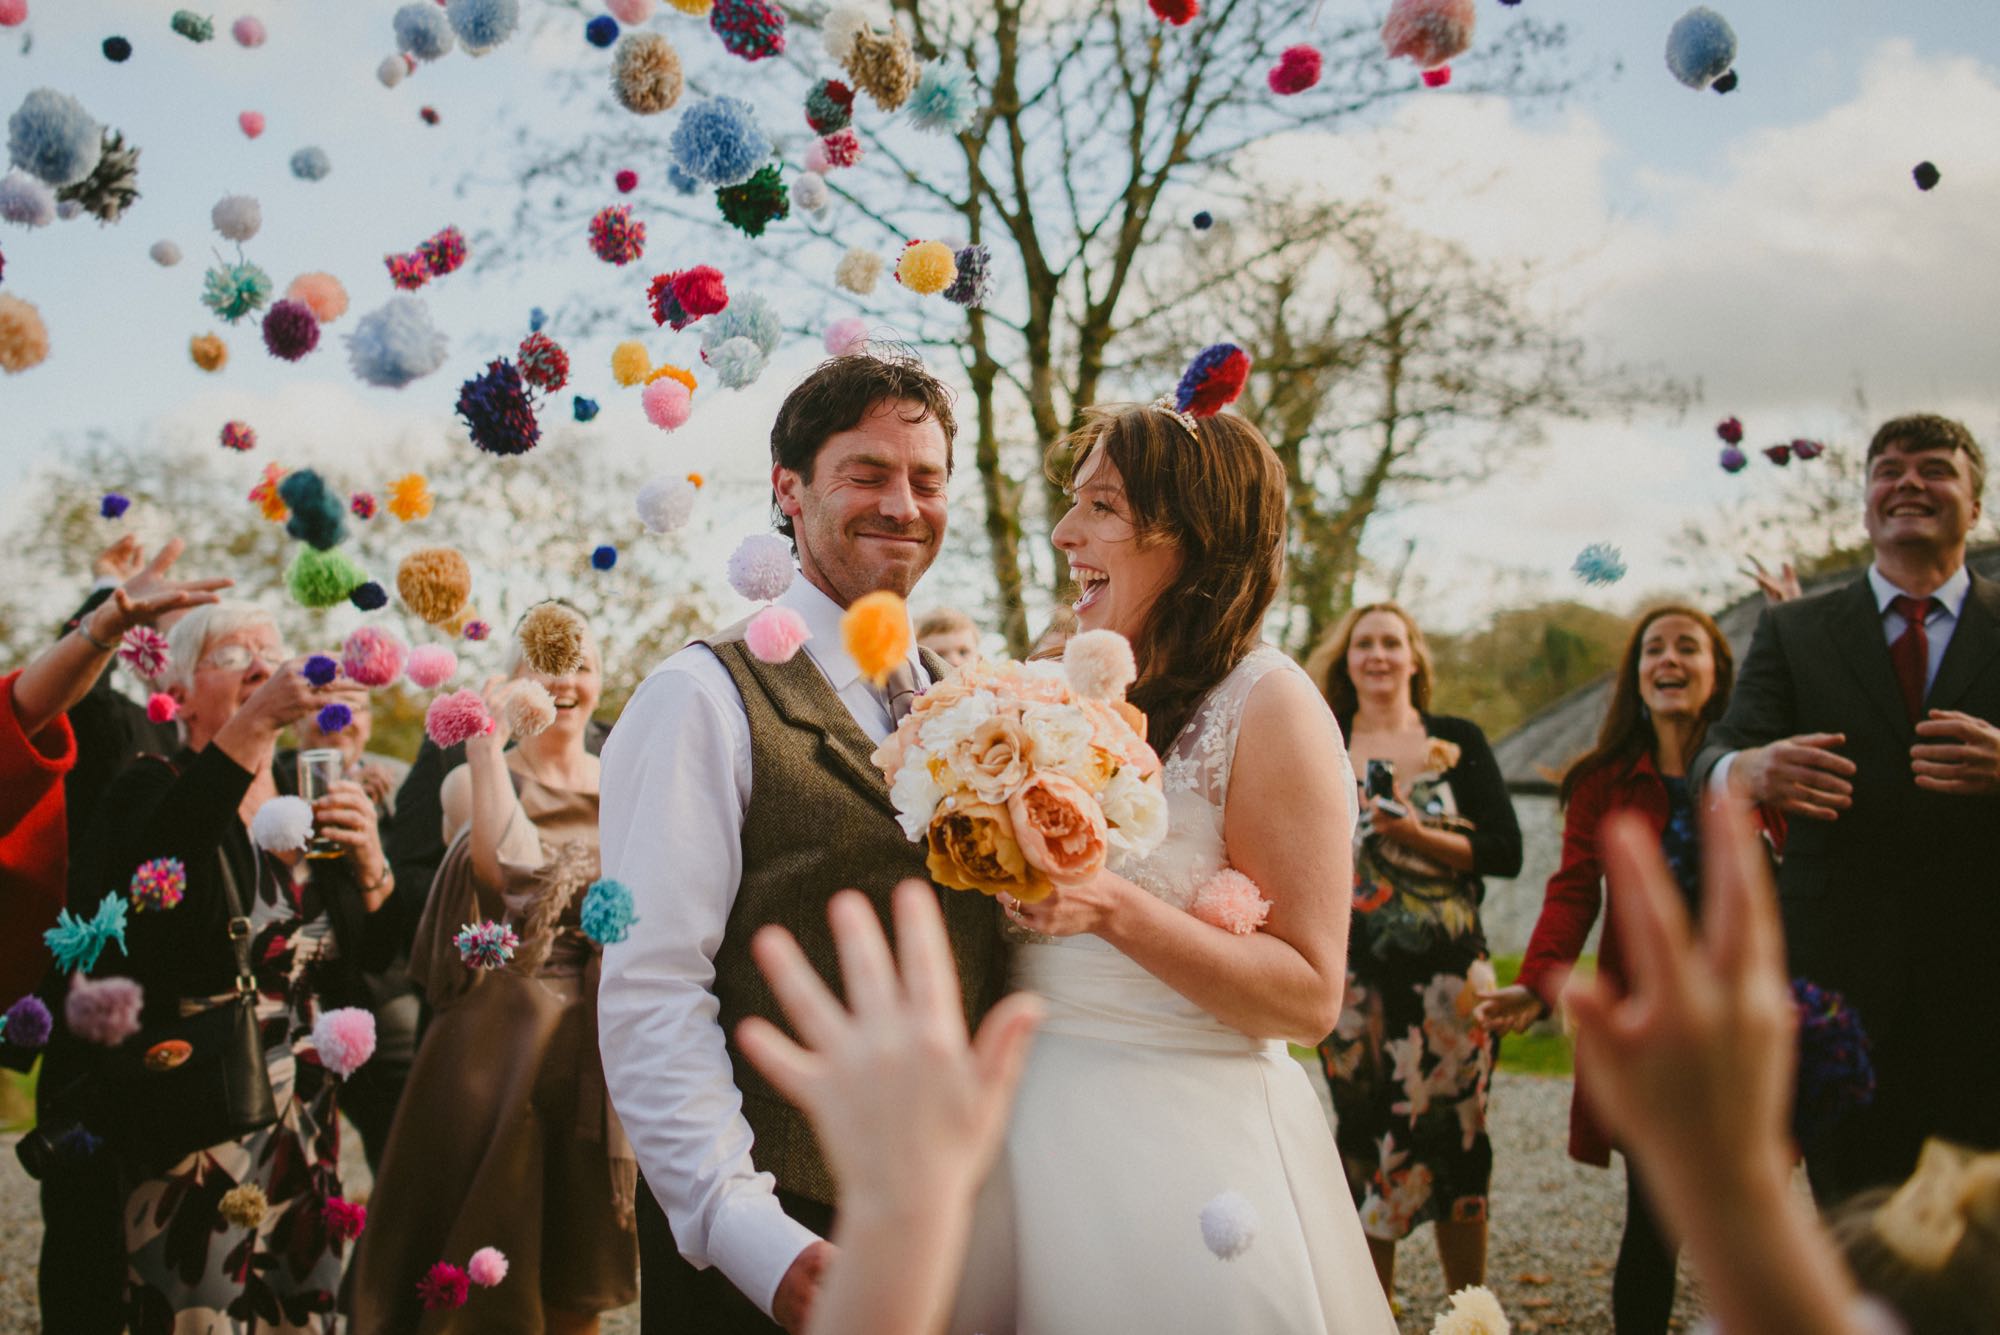 This image shows a bride and groom outside with some other guests standing around them. The guests are throuwing pompom confetti. The couple are in the foreground and the shot is from the knees up. The couple are standing side-by-side with the groom on the left and the bride for the right.The bride has dark hair which she is wearing loose. She's wearing an a-line sleeveless dress with the lace detailing at the shoulders. In her left hand she carries a bouquet of muted pink and white peonies. The groom has dark hair and is wearing a white shirt and a brown tweed waistcoat. The groom has his eyes closed and is smiling the bride is looking at her groom and laughing. In the background there are some trees without leaves. In the foreground there is a hand throwing confetti.